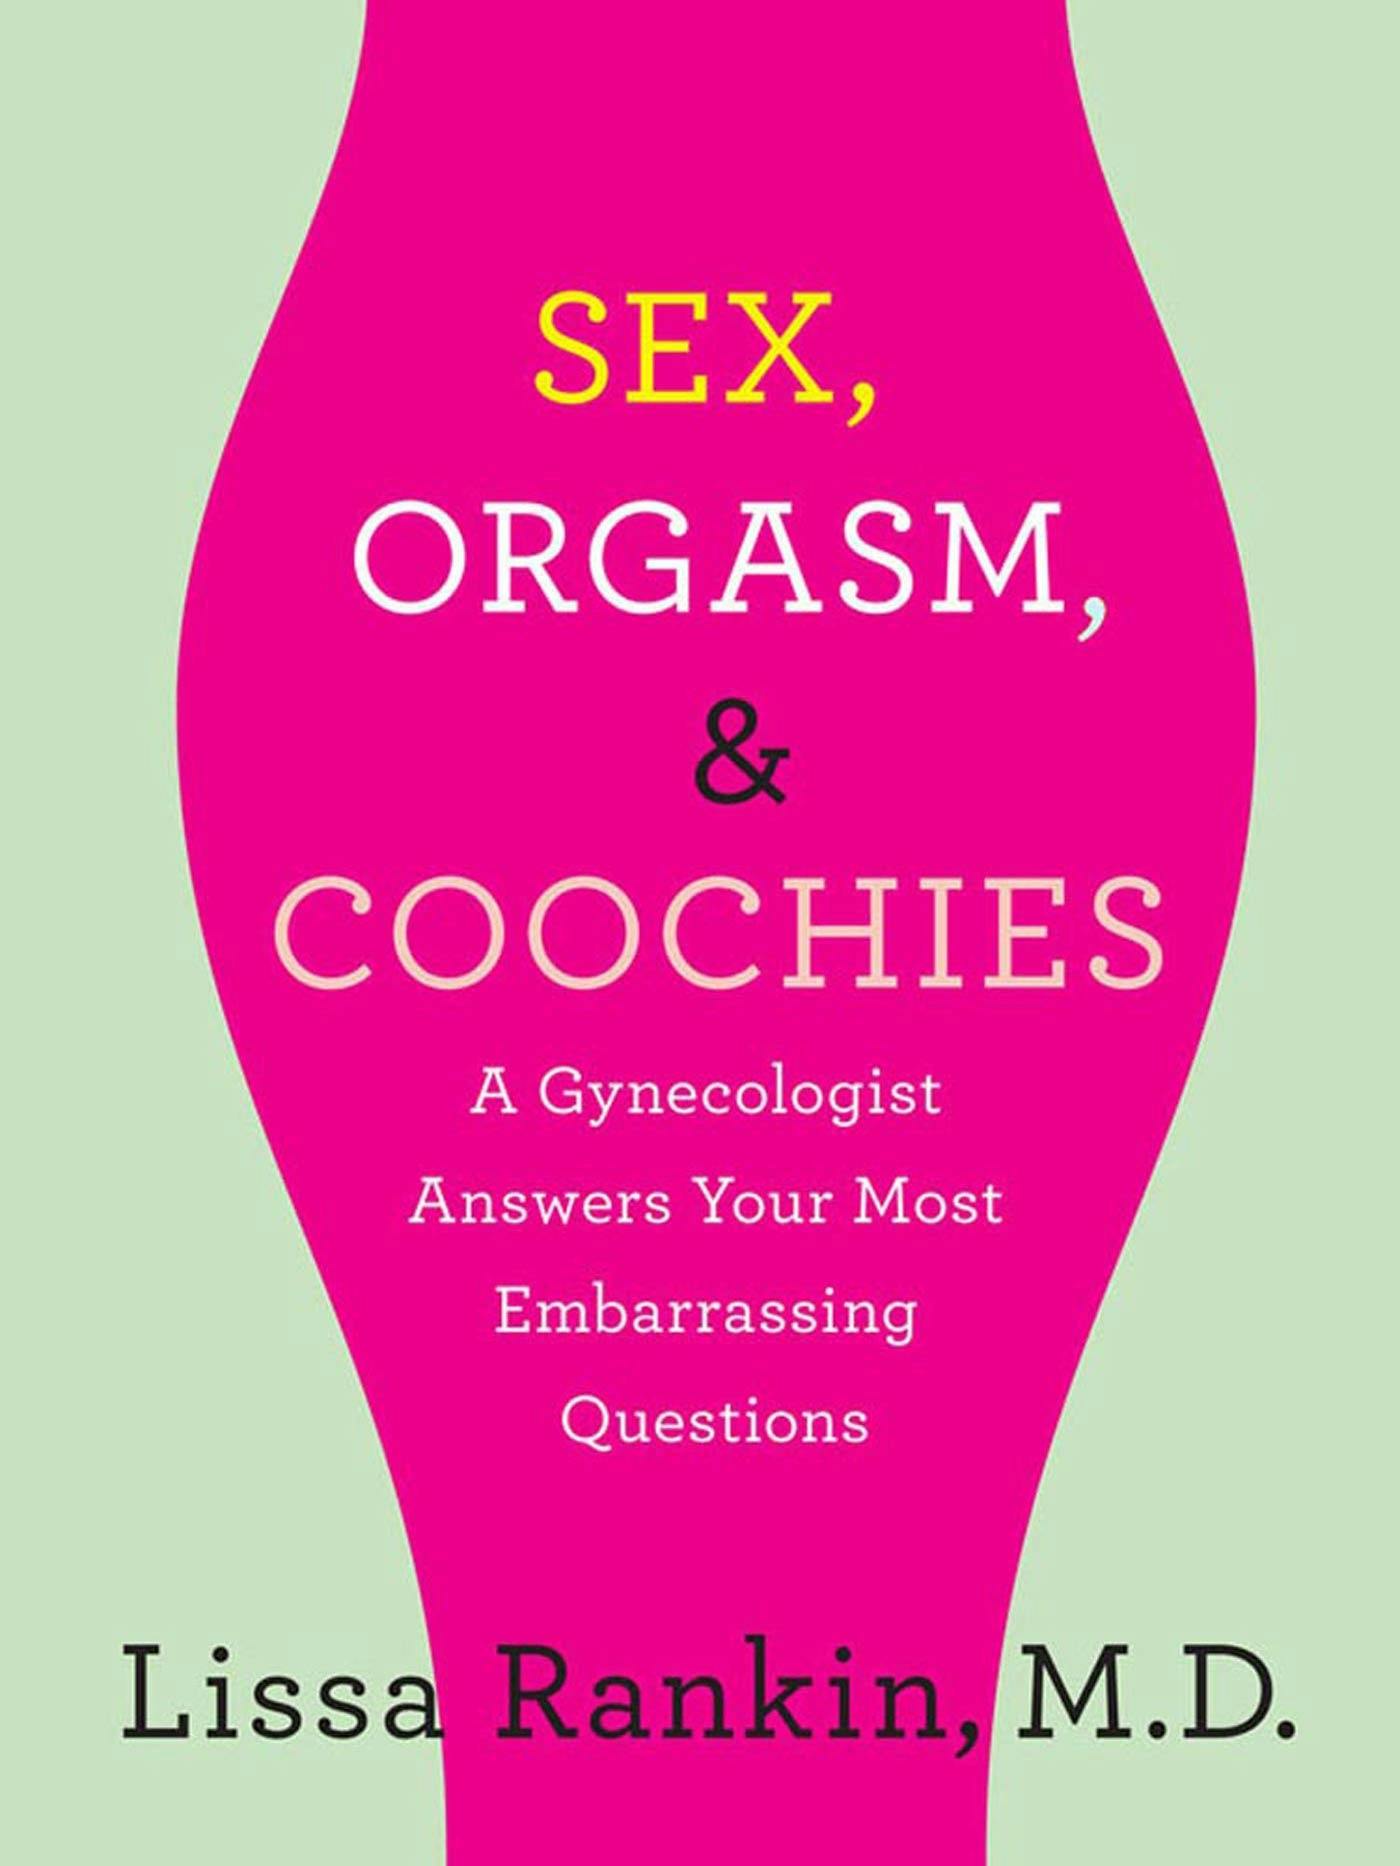 Sex, Orgasm, and Coochies A Gynecologist Answers Your Most Embarrassing Questions photo